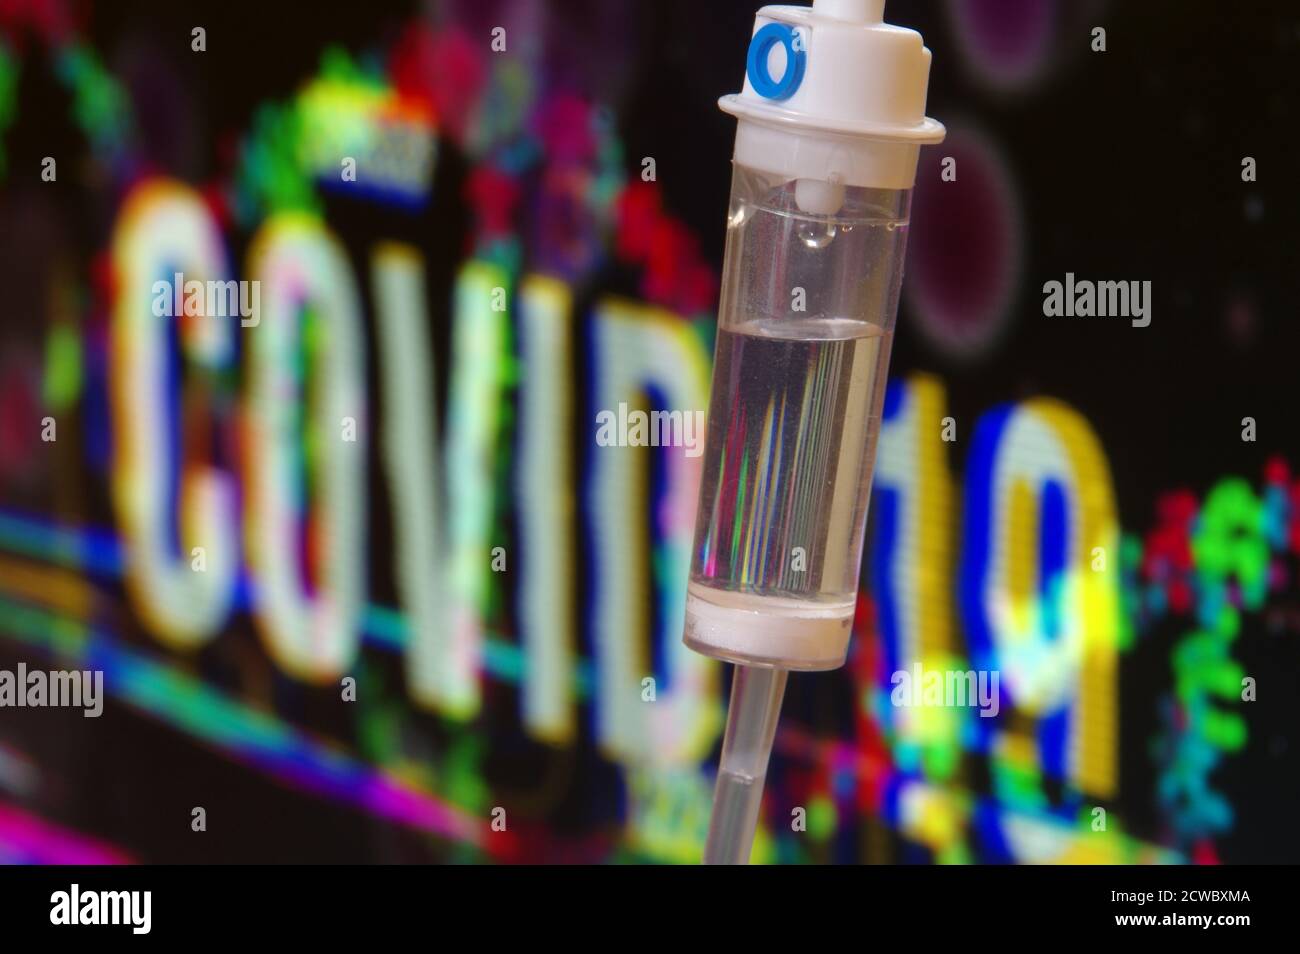 Epidemic Covid-19 crisis. A drip with pandemic symbol on a background illustration. Health, medical and coronavirus concept. Stock Photo